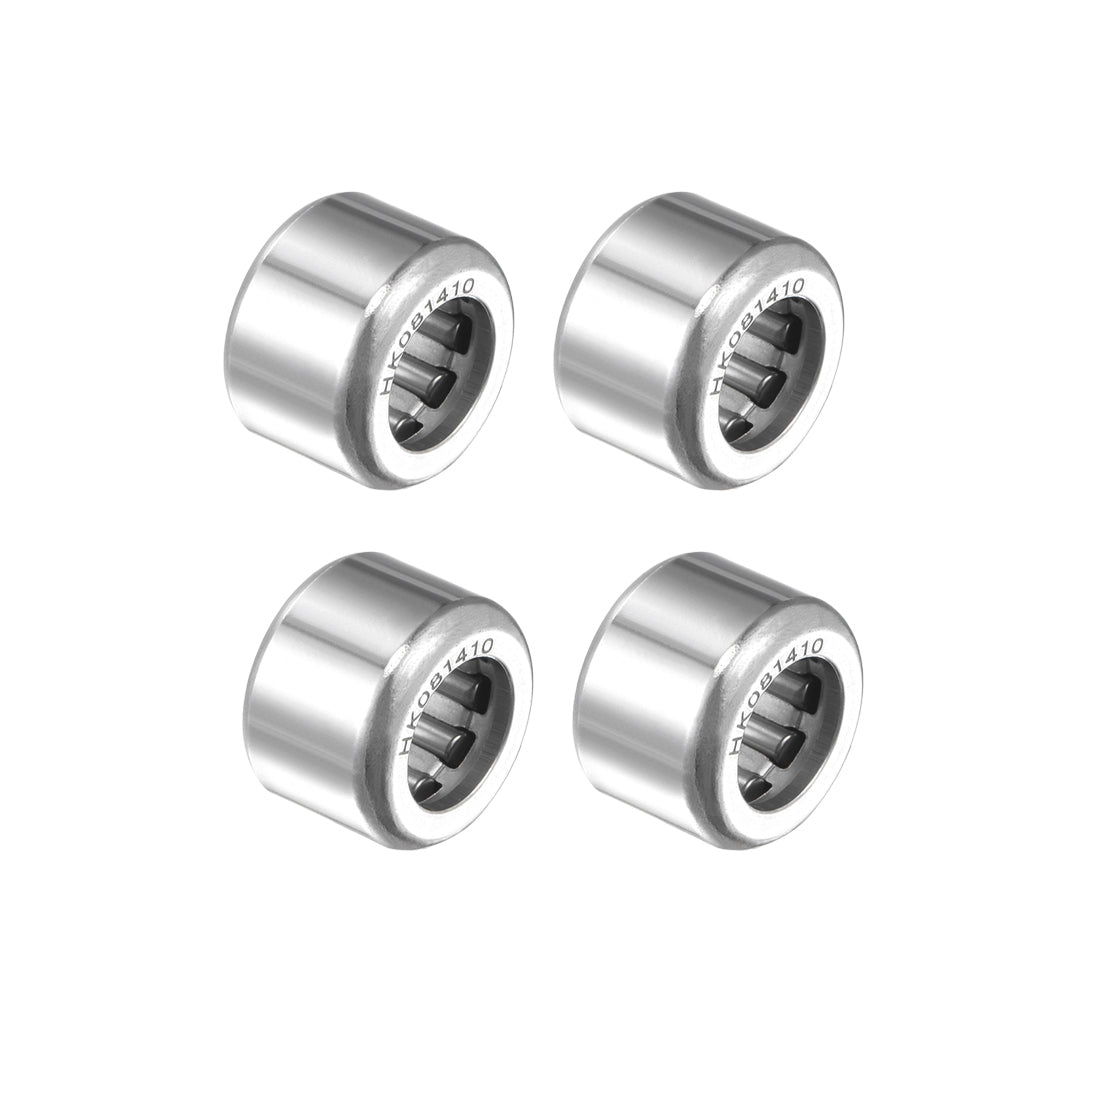 uxcell Uxcell HK081410 Drawn Cup Needle Roller Bearings 8mm Bore, 14mm OD, 10mm Width 4pcs